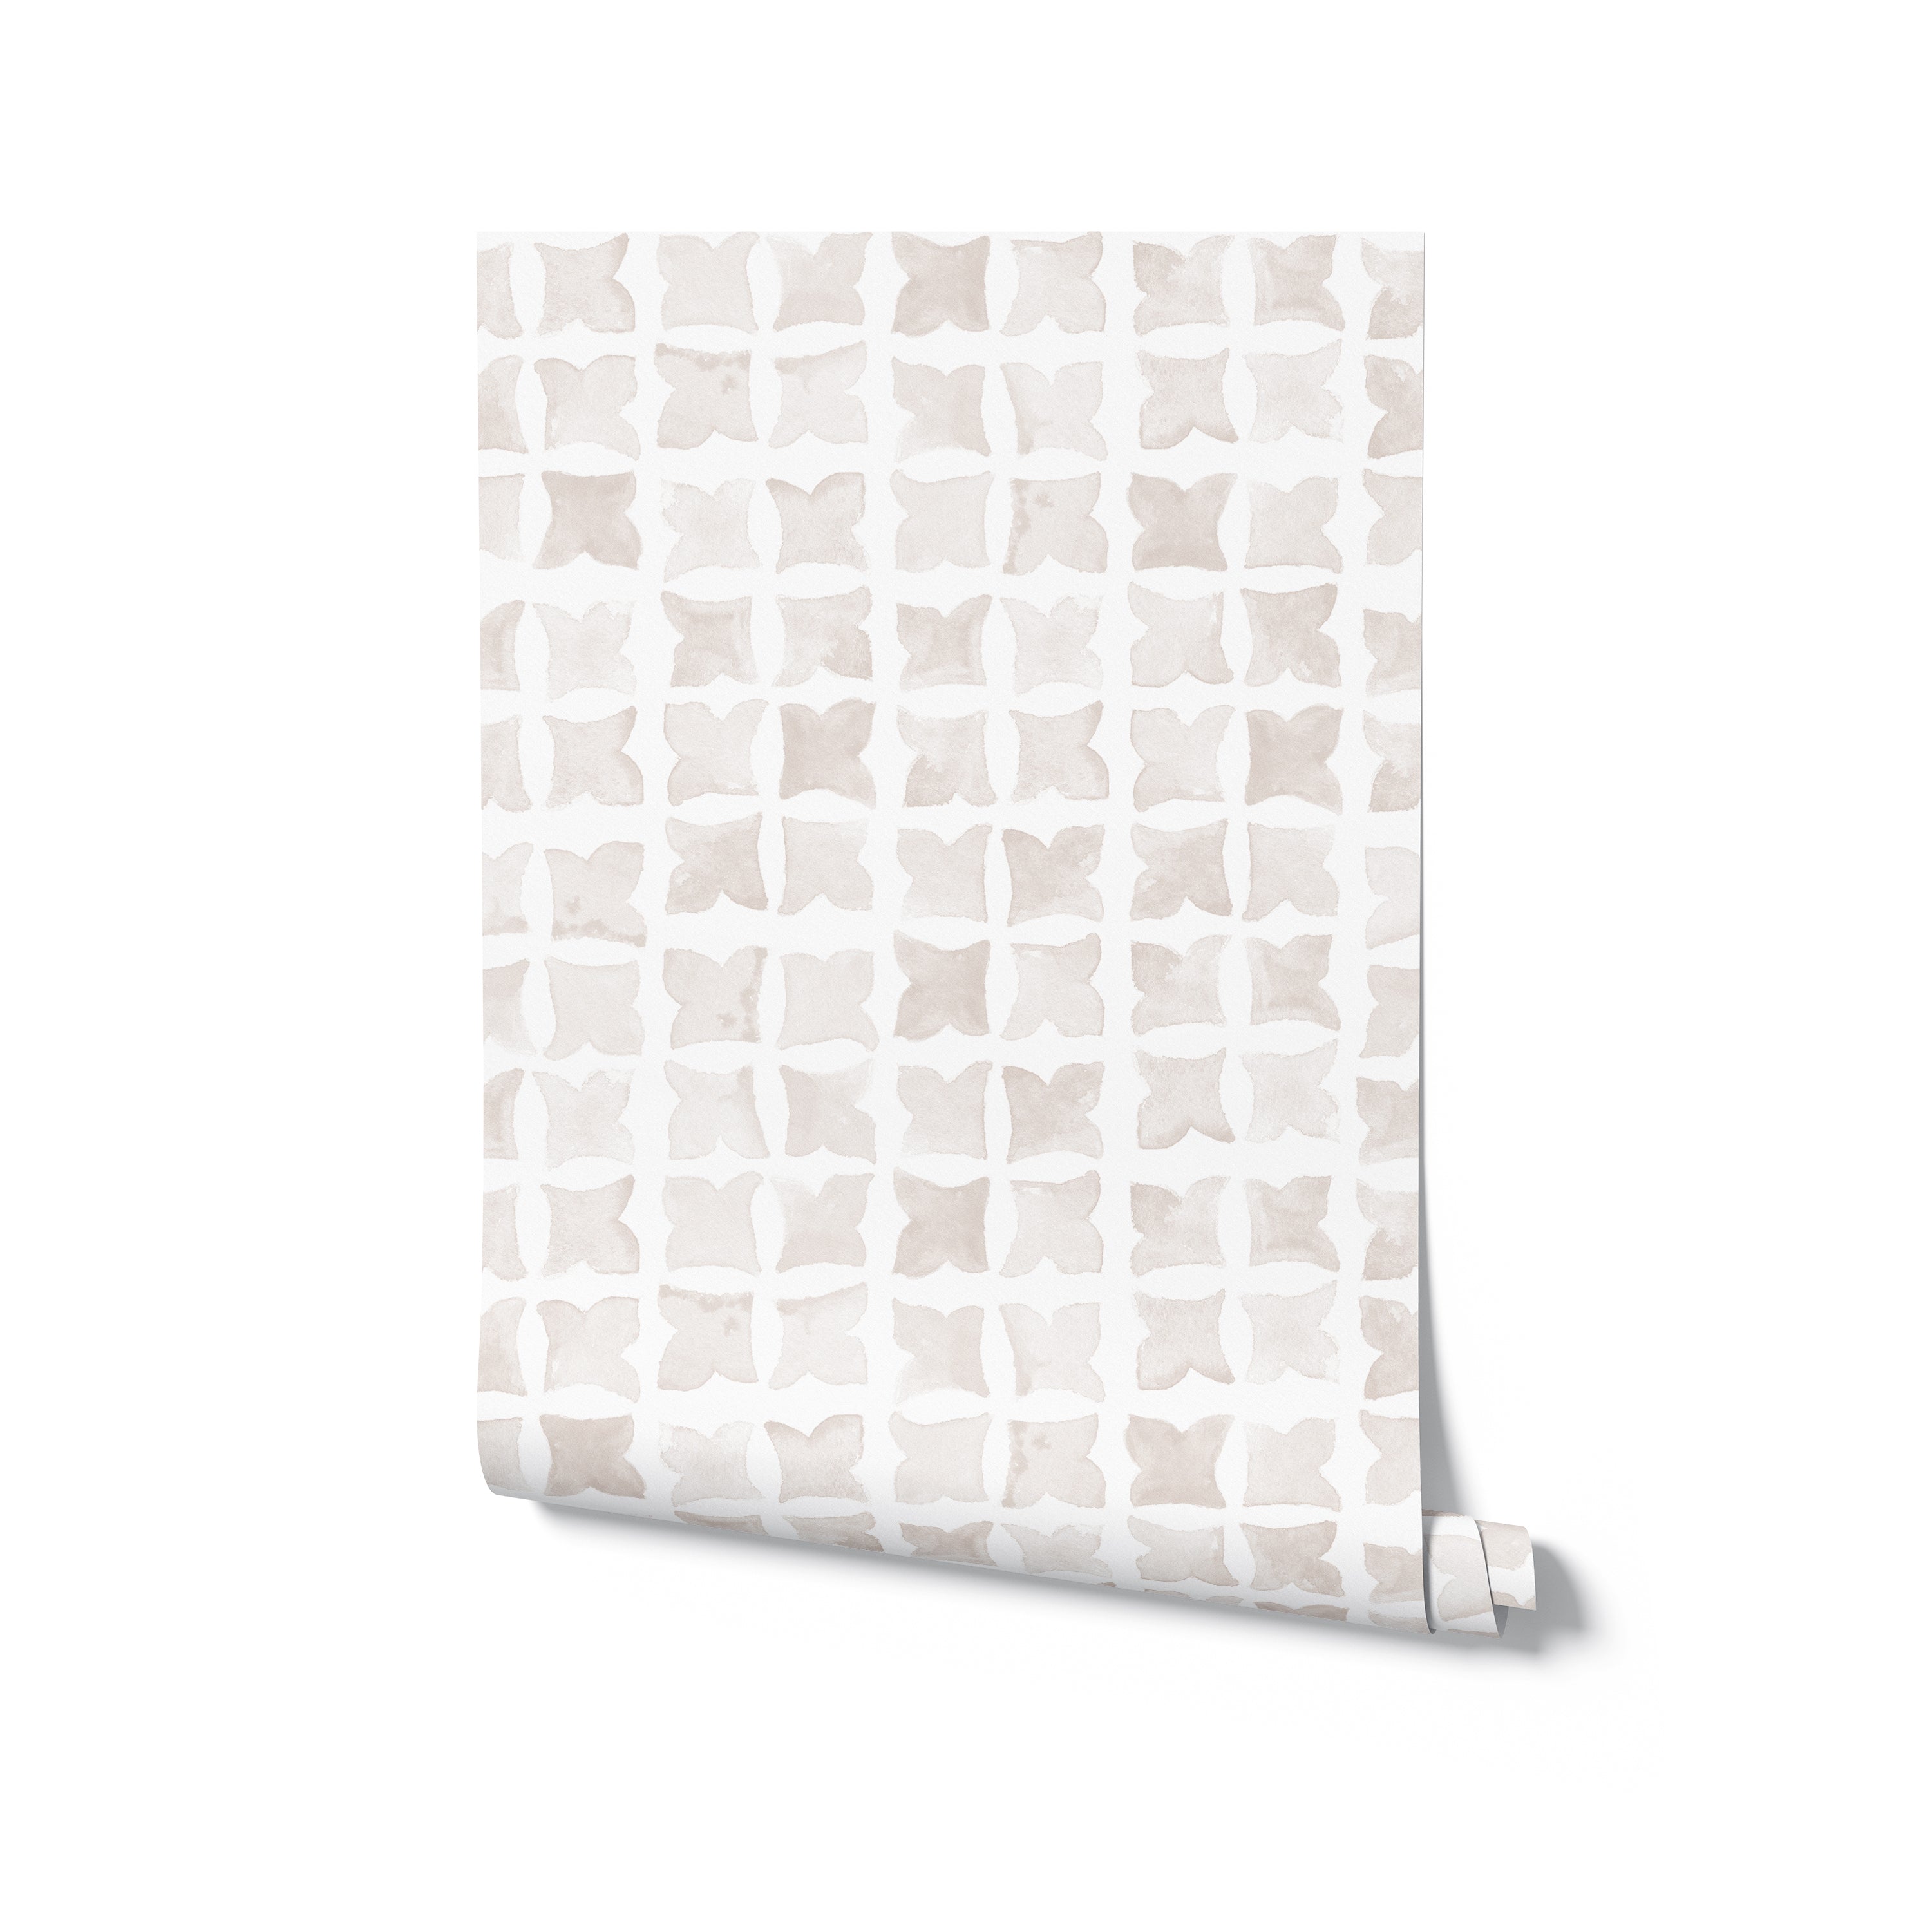 This image shows a single roll of Moroccan Tile - Squares wallpaper unfurled slightly to reveal the pattern. The wallpaper has a matte finish with a watercolor effect, displaying the consistent beige square shapes on a white background. The roll suggests the wallpaper's readiness for application in a home improvement setting.